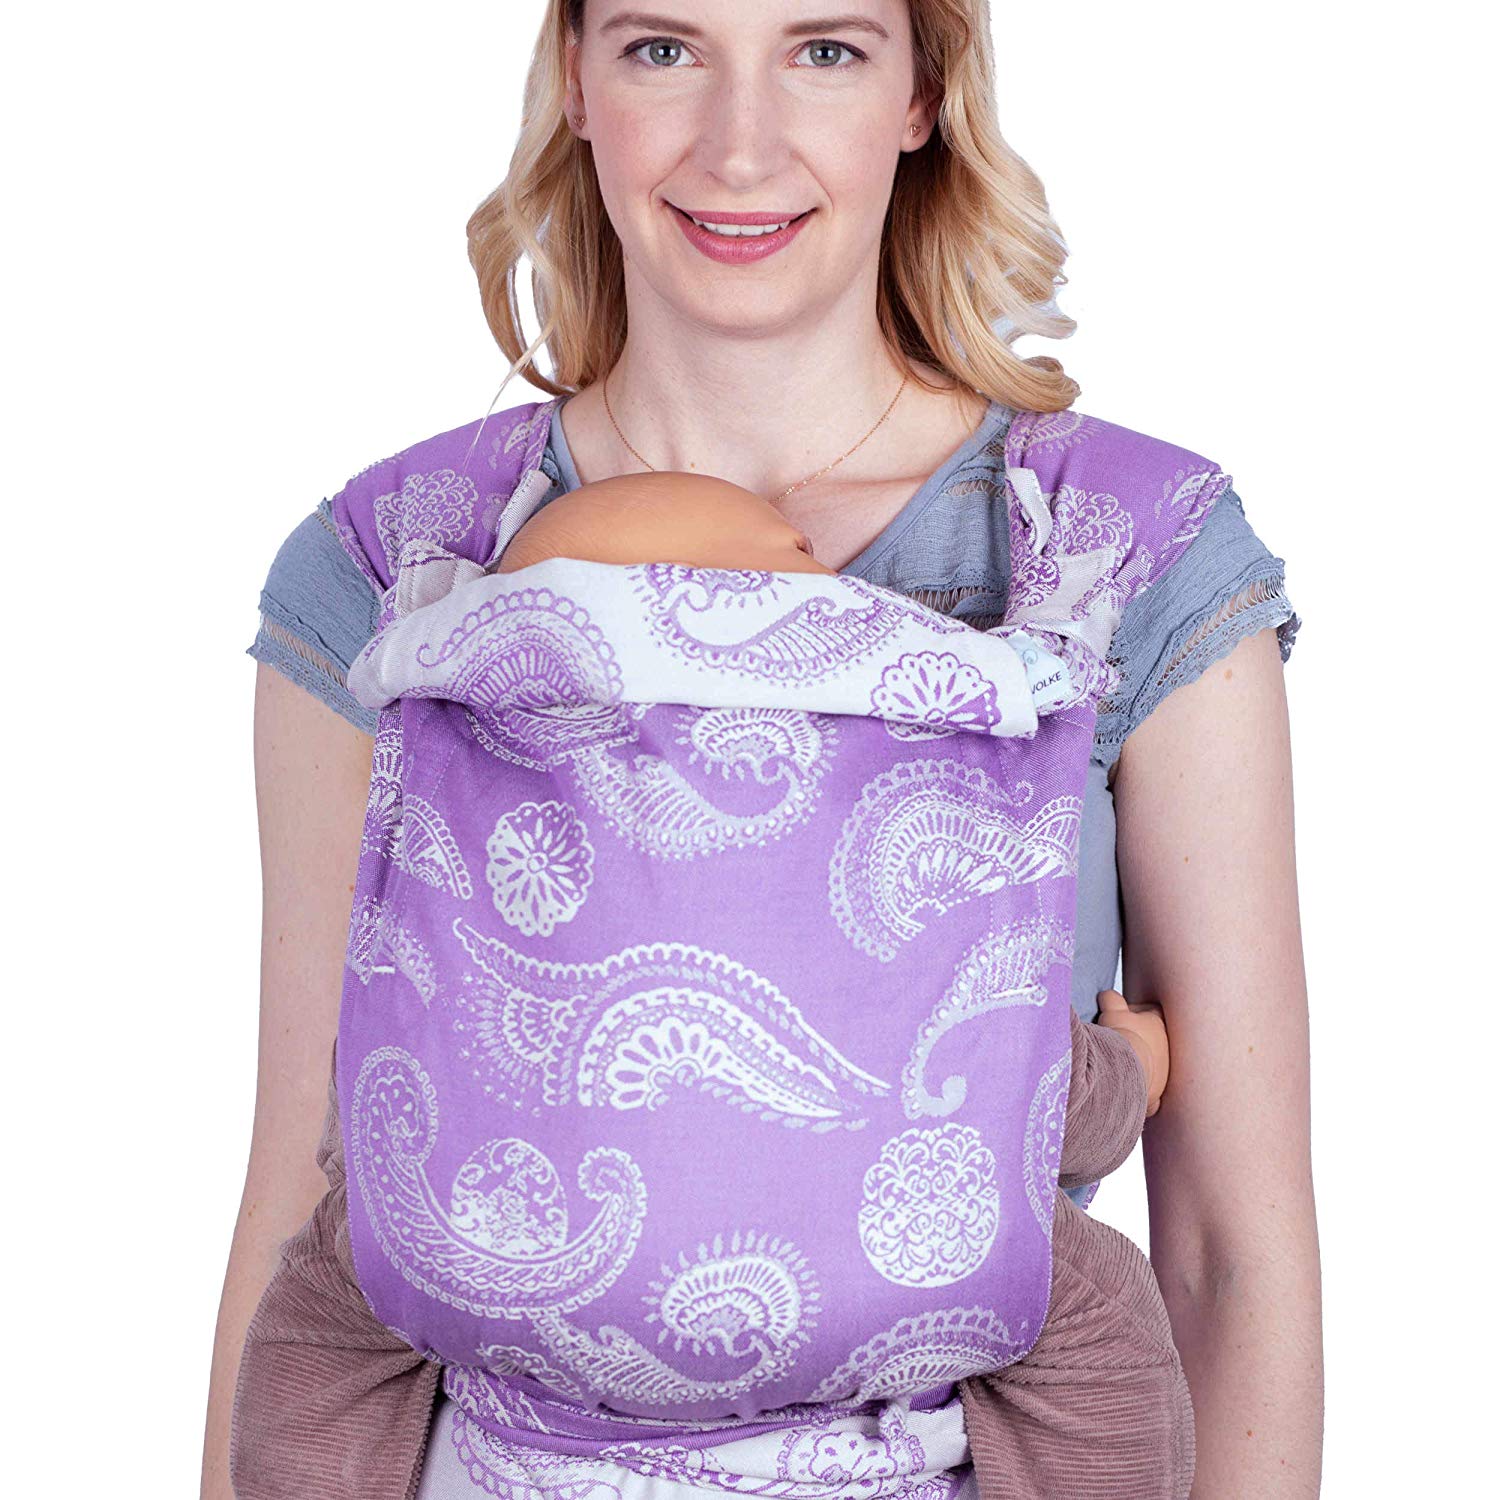 Schmusewolke Mei Tai Baby Carrier Newborn and Toddler Graphic Copper Modal Baby Size 0-24 Months 3-16 kg Stomach and Back Carrier